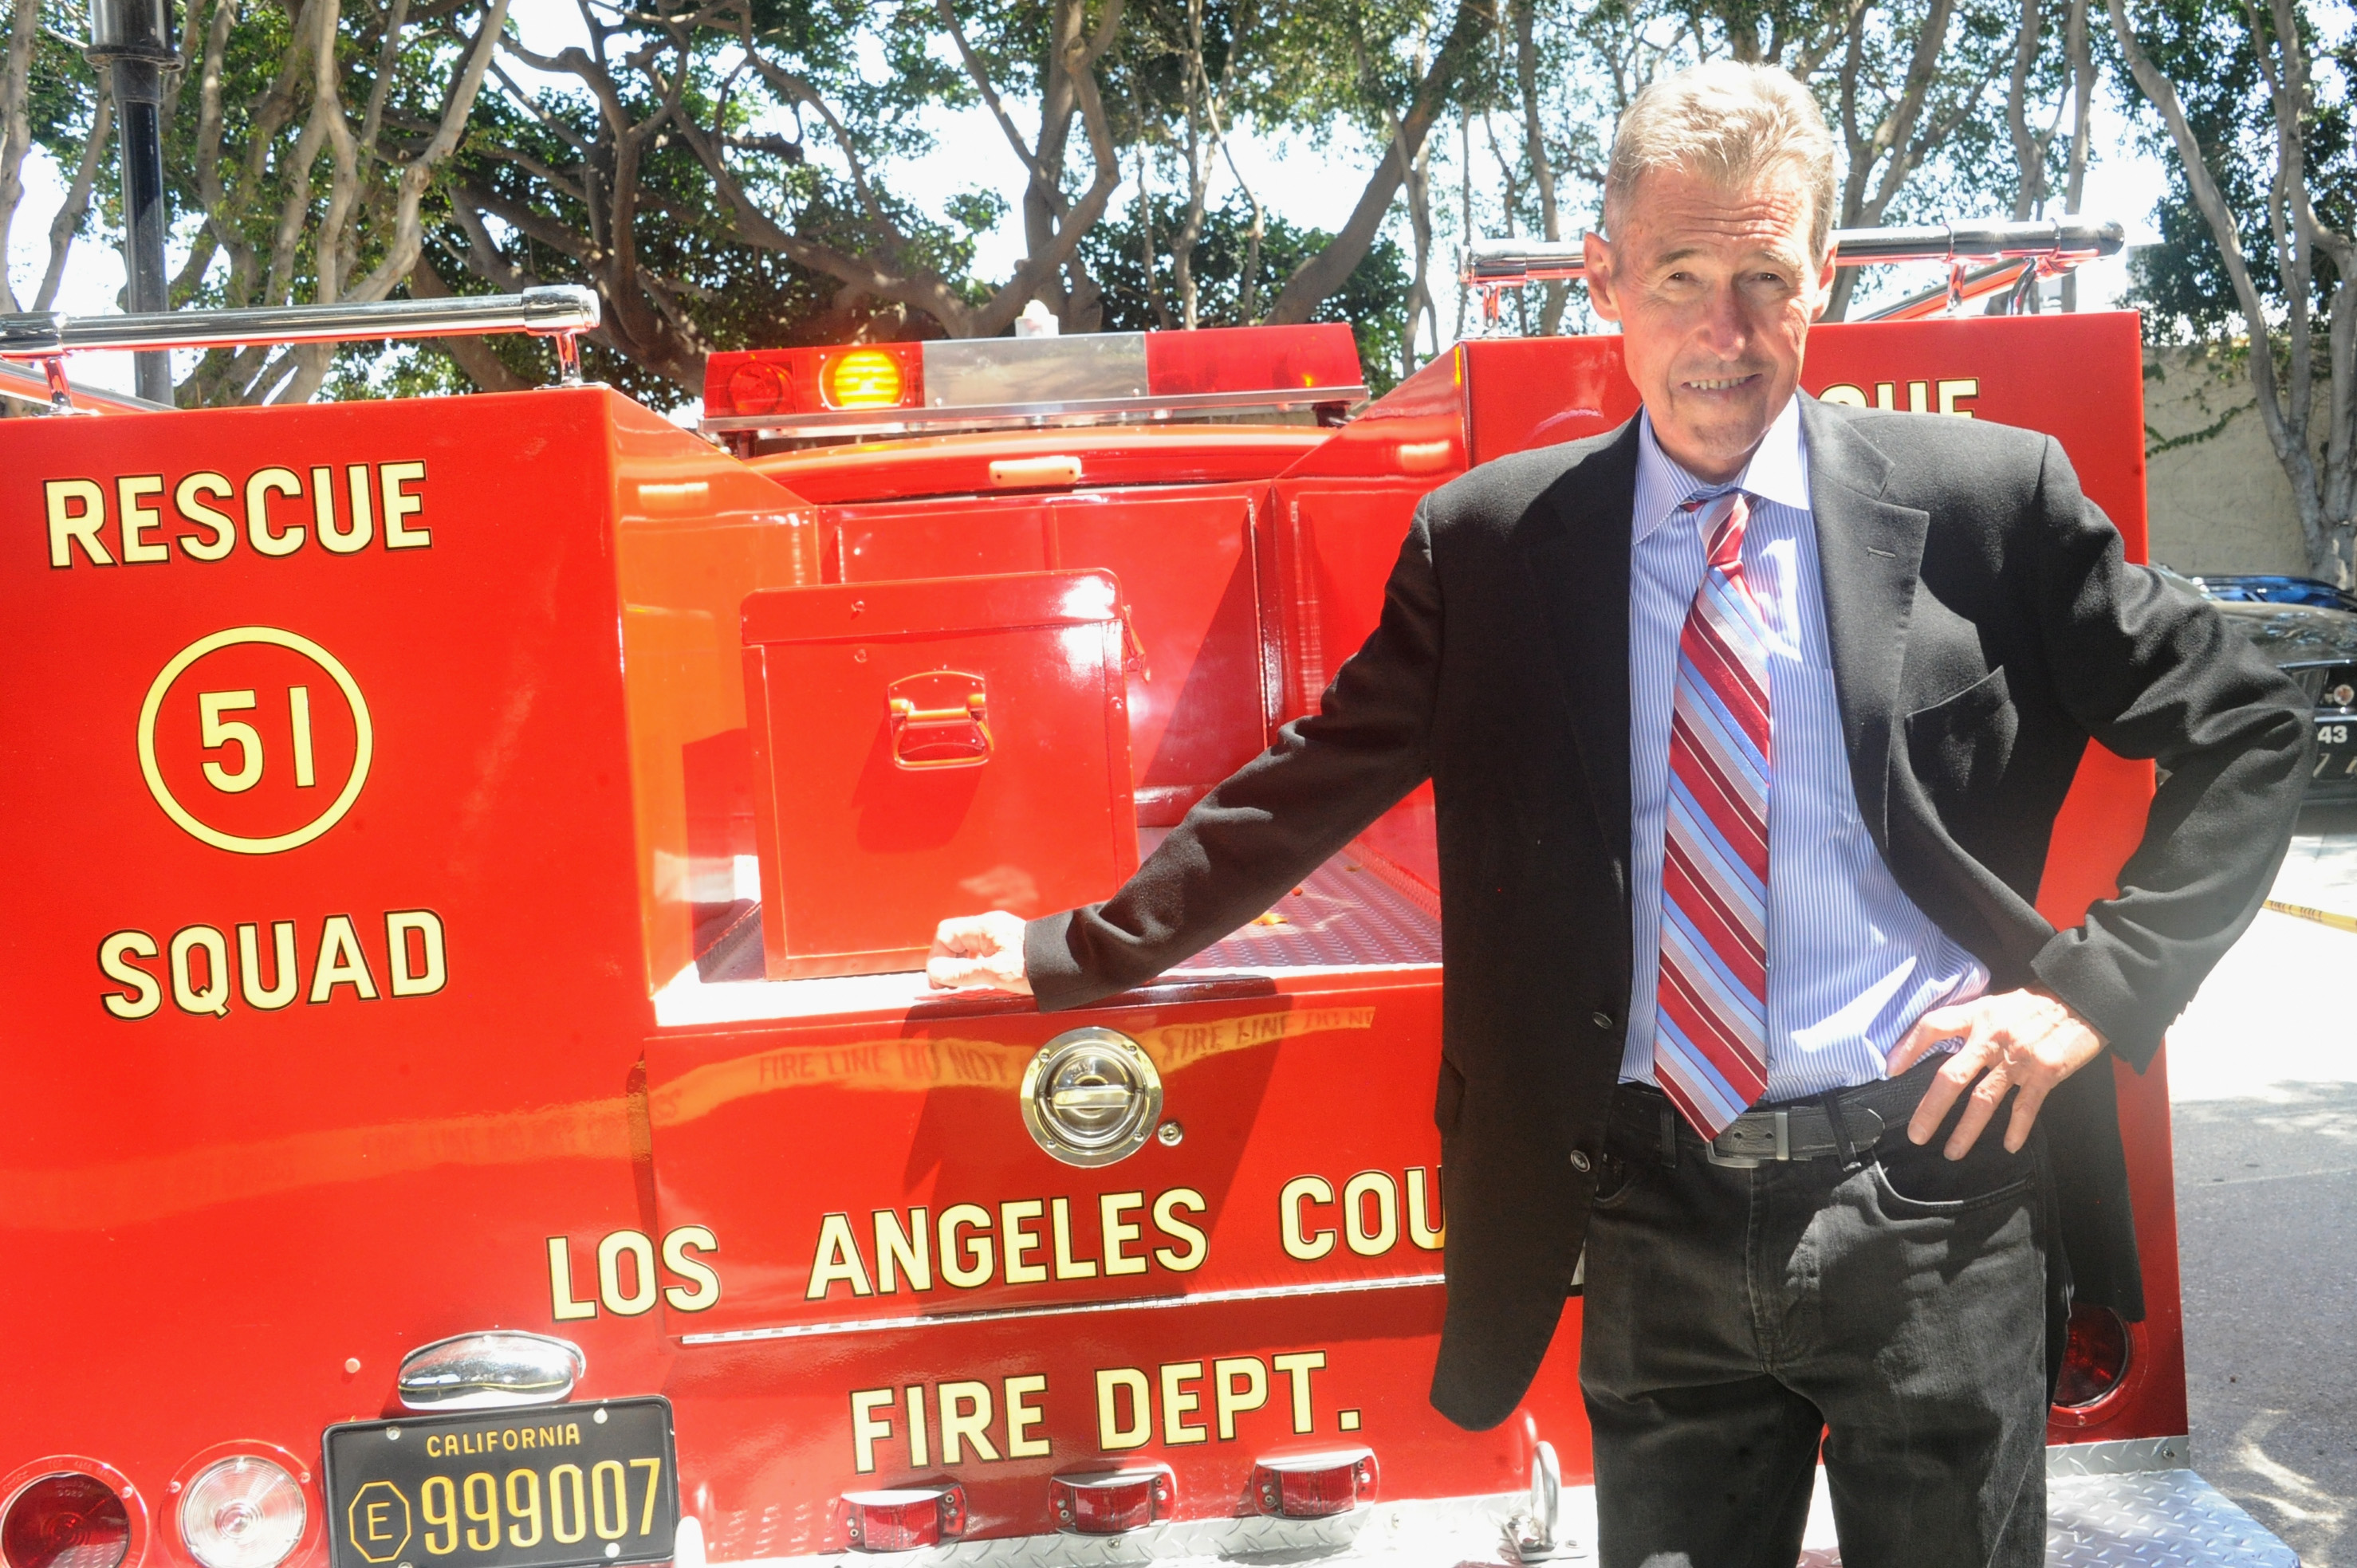 Randolph Mantooth with his vehicle from 'Emergency' at The Hollywood Show in 2017 | Source: Getty Images